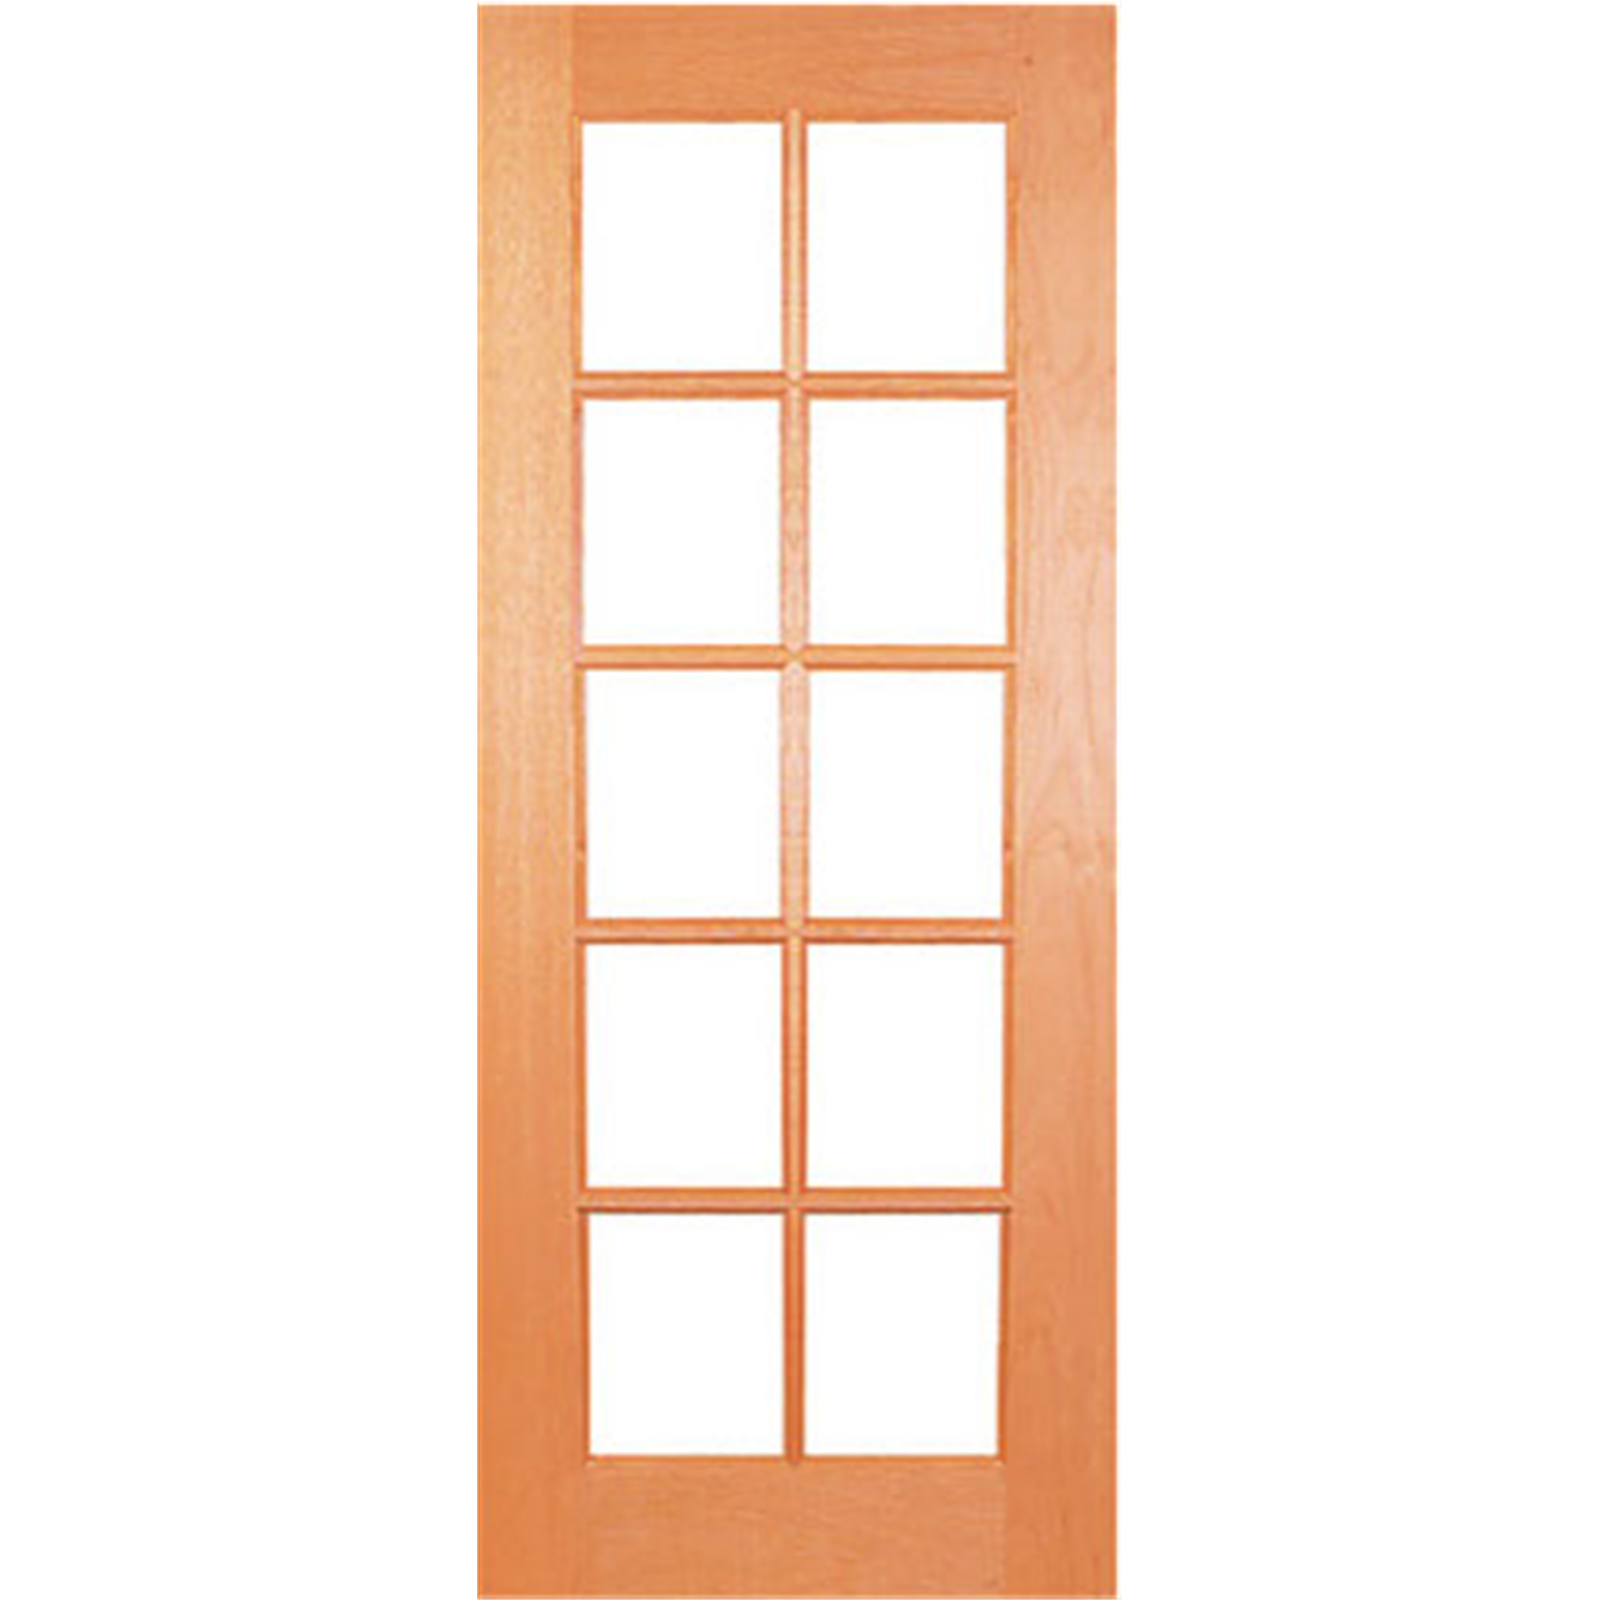 Woodcraft Doors 2040 x 820 x 40mm Flash 1 Entrance Door With Clear Safety Glass